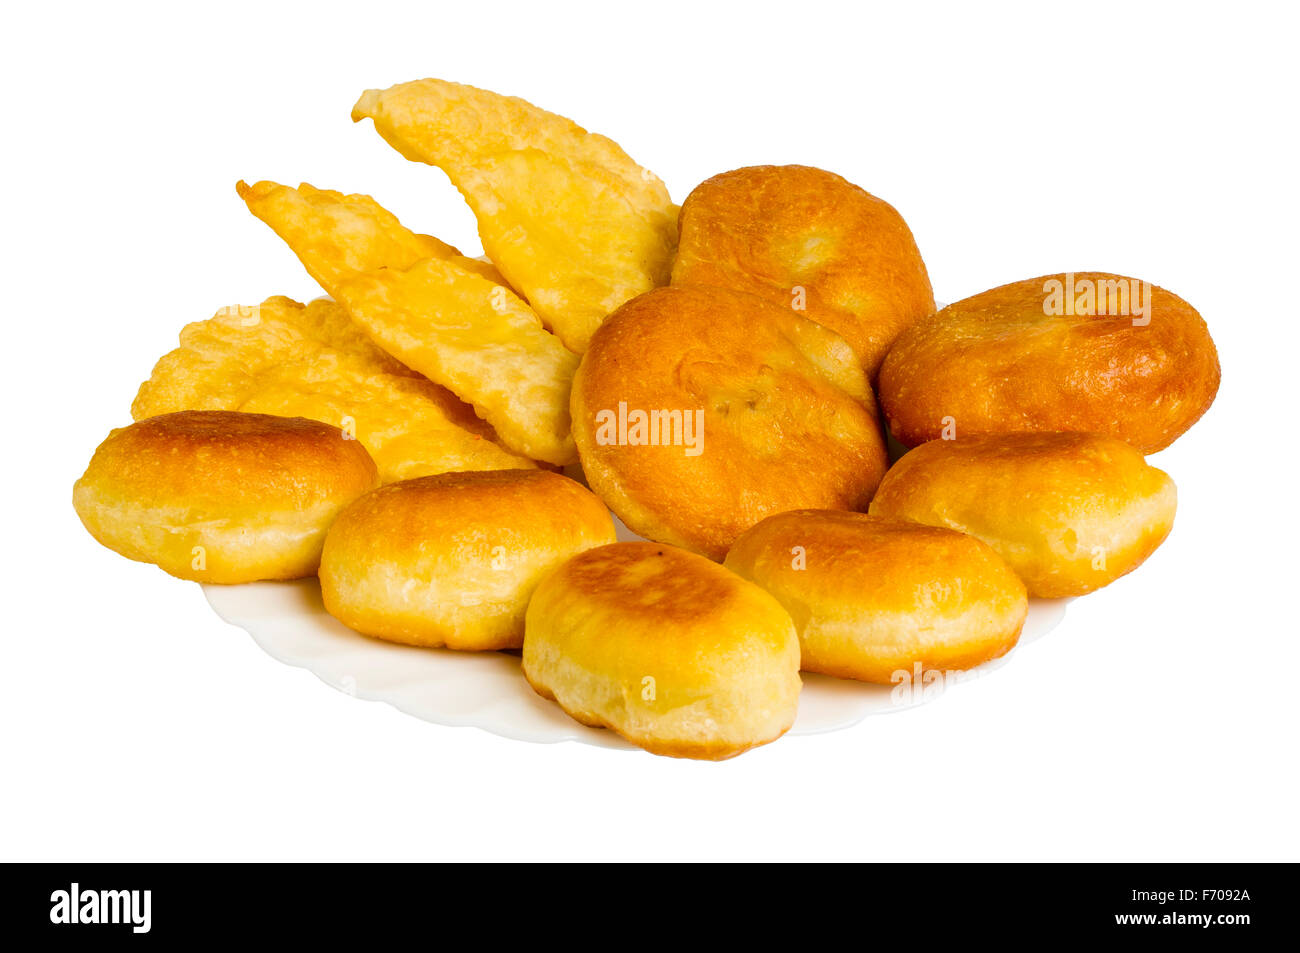 fried pies and pasties on the plate, isolated on white background Stock Photo